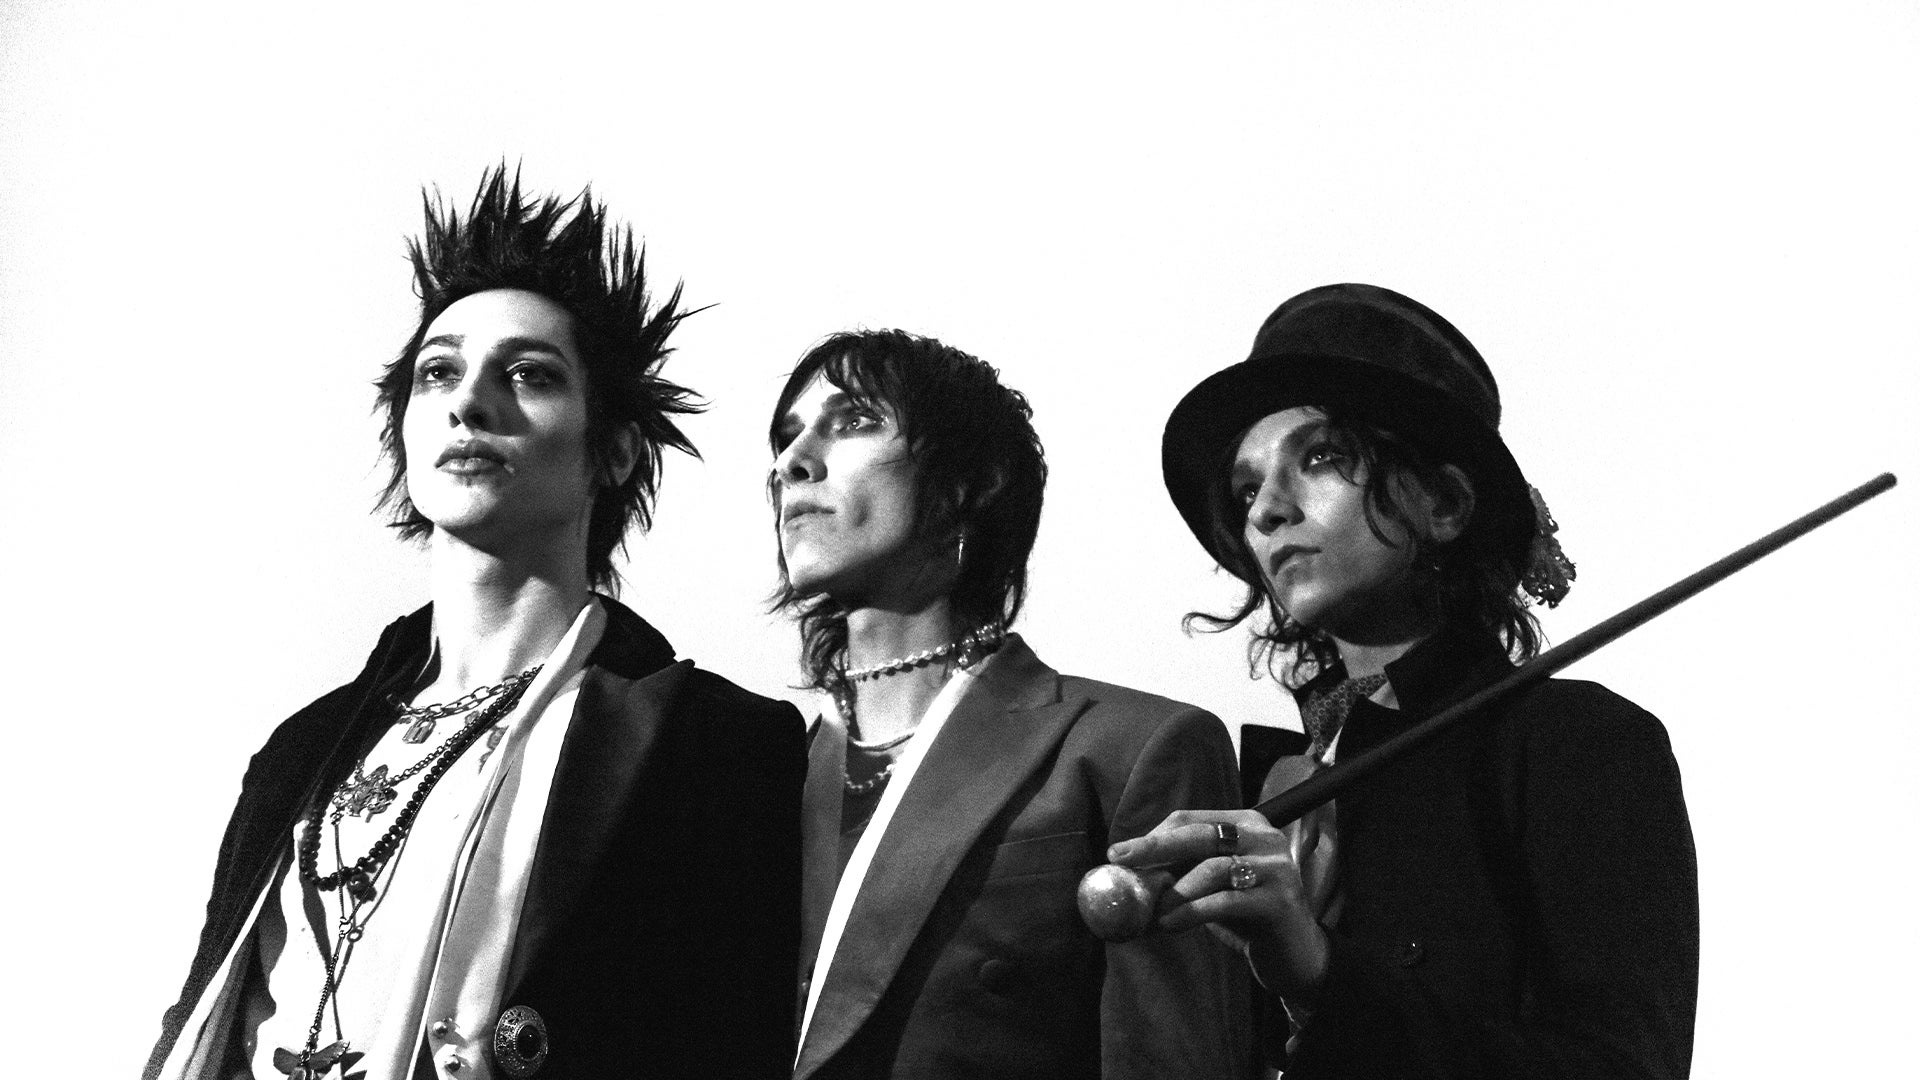 Palaye Royale Band, Concert tickets, Live performance, Music, 1920x1080 Full HD Desktop